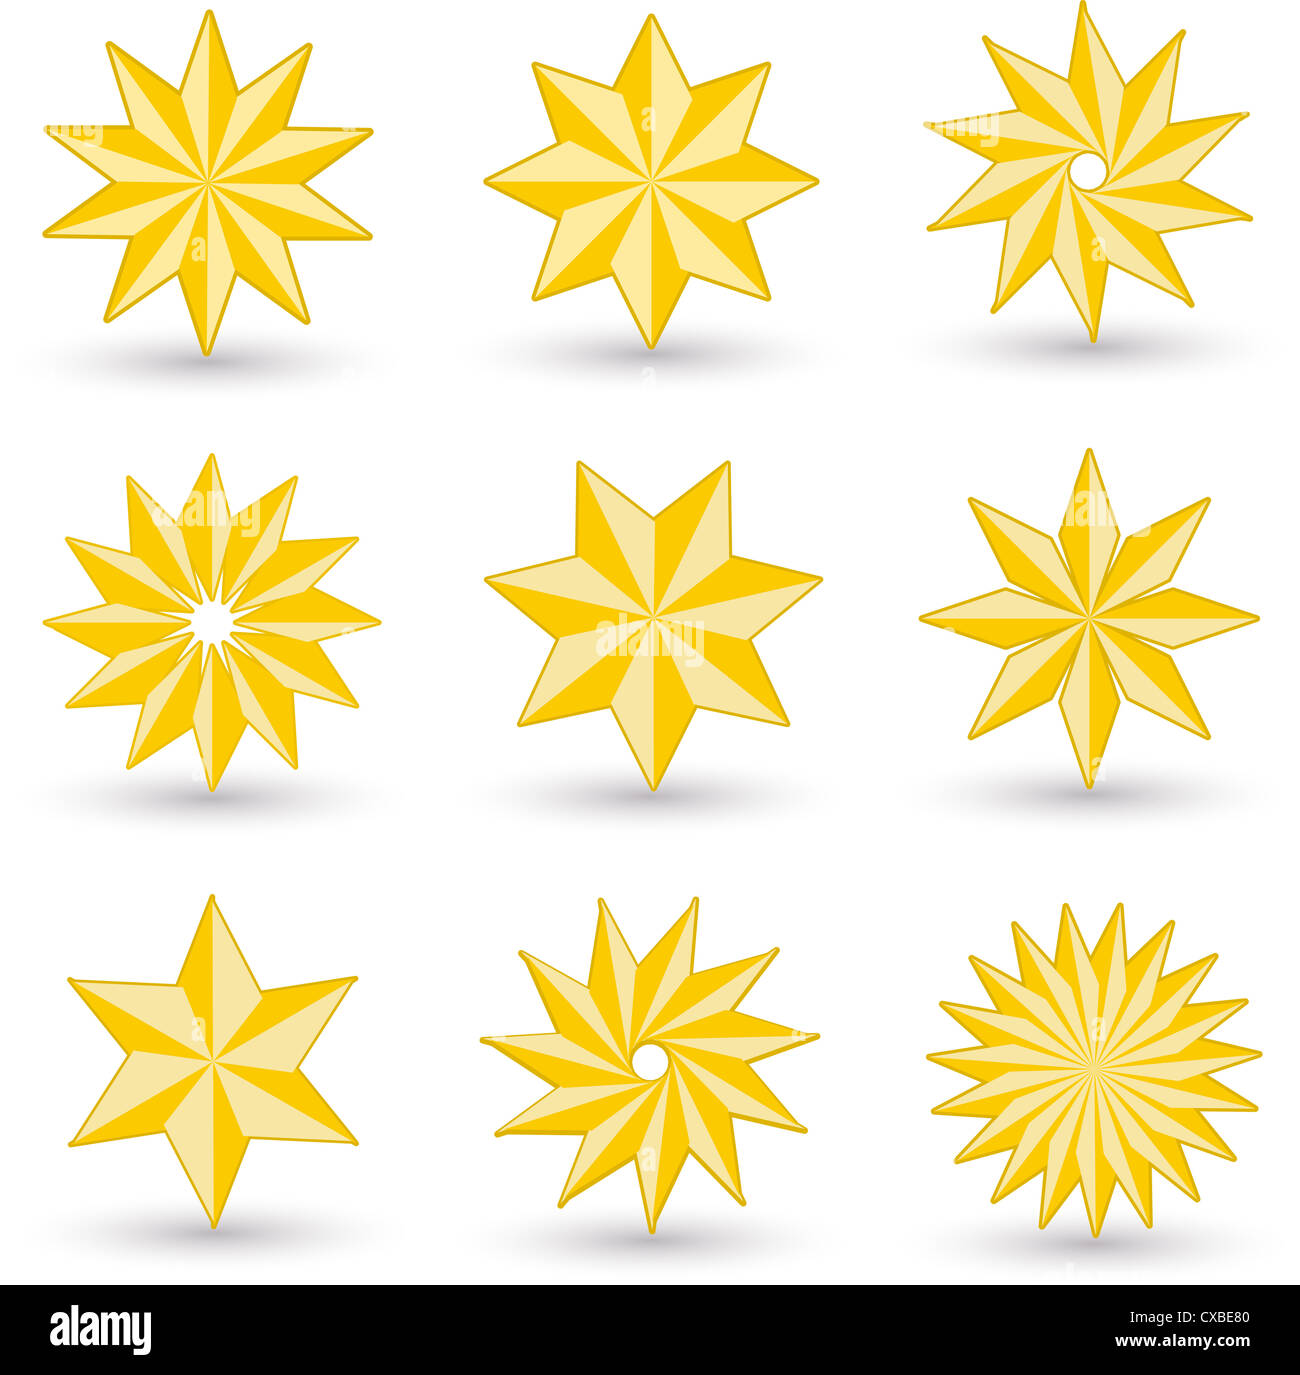 Collection of various designs of gold star icons Stock Photo